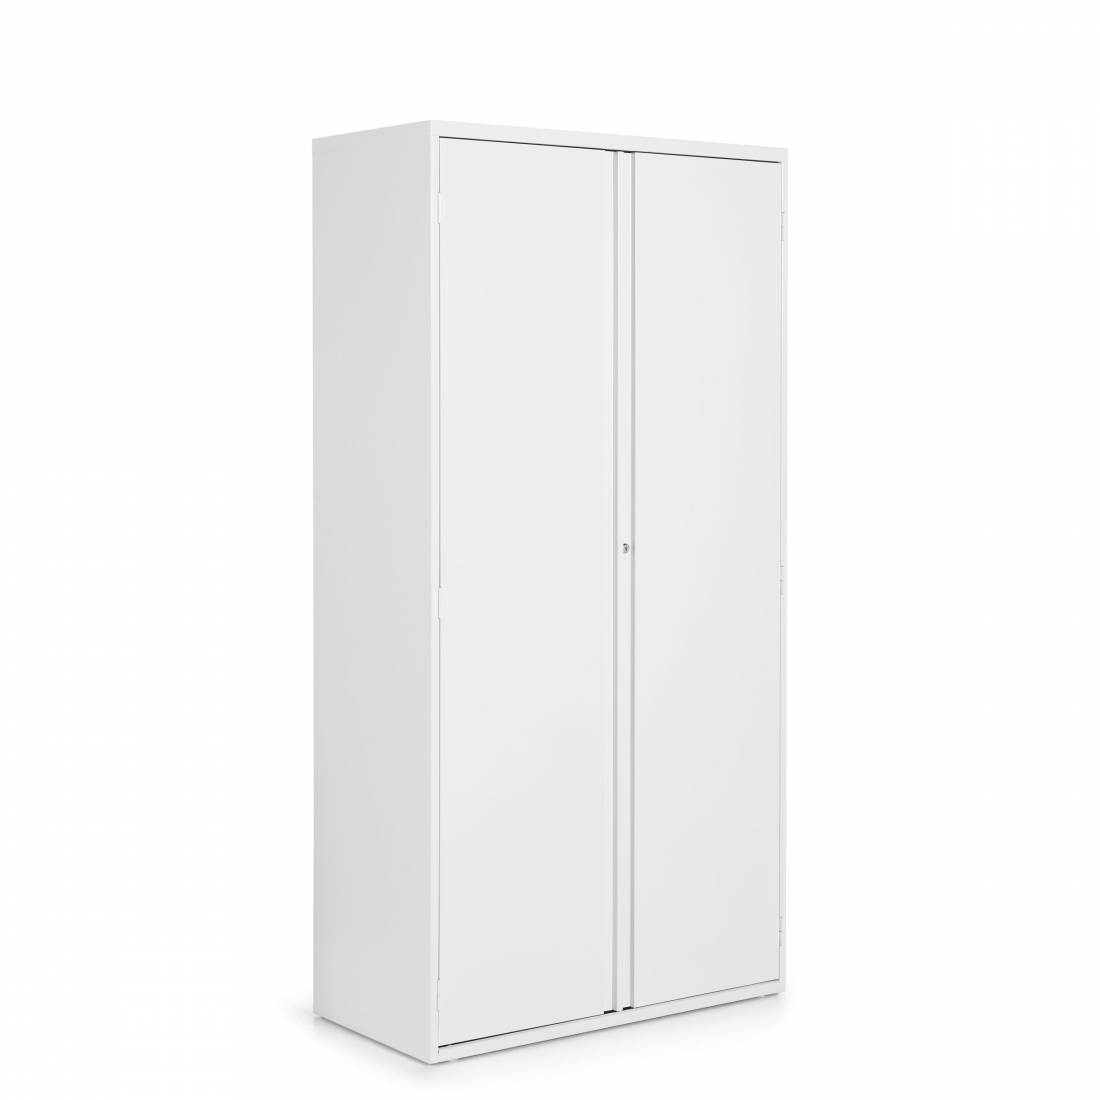 Two Door Storage Cabinet - One Fixed Shelf, Three Adjustable Shelves, Looped Full Pull